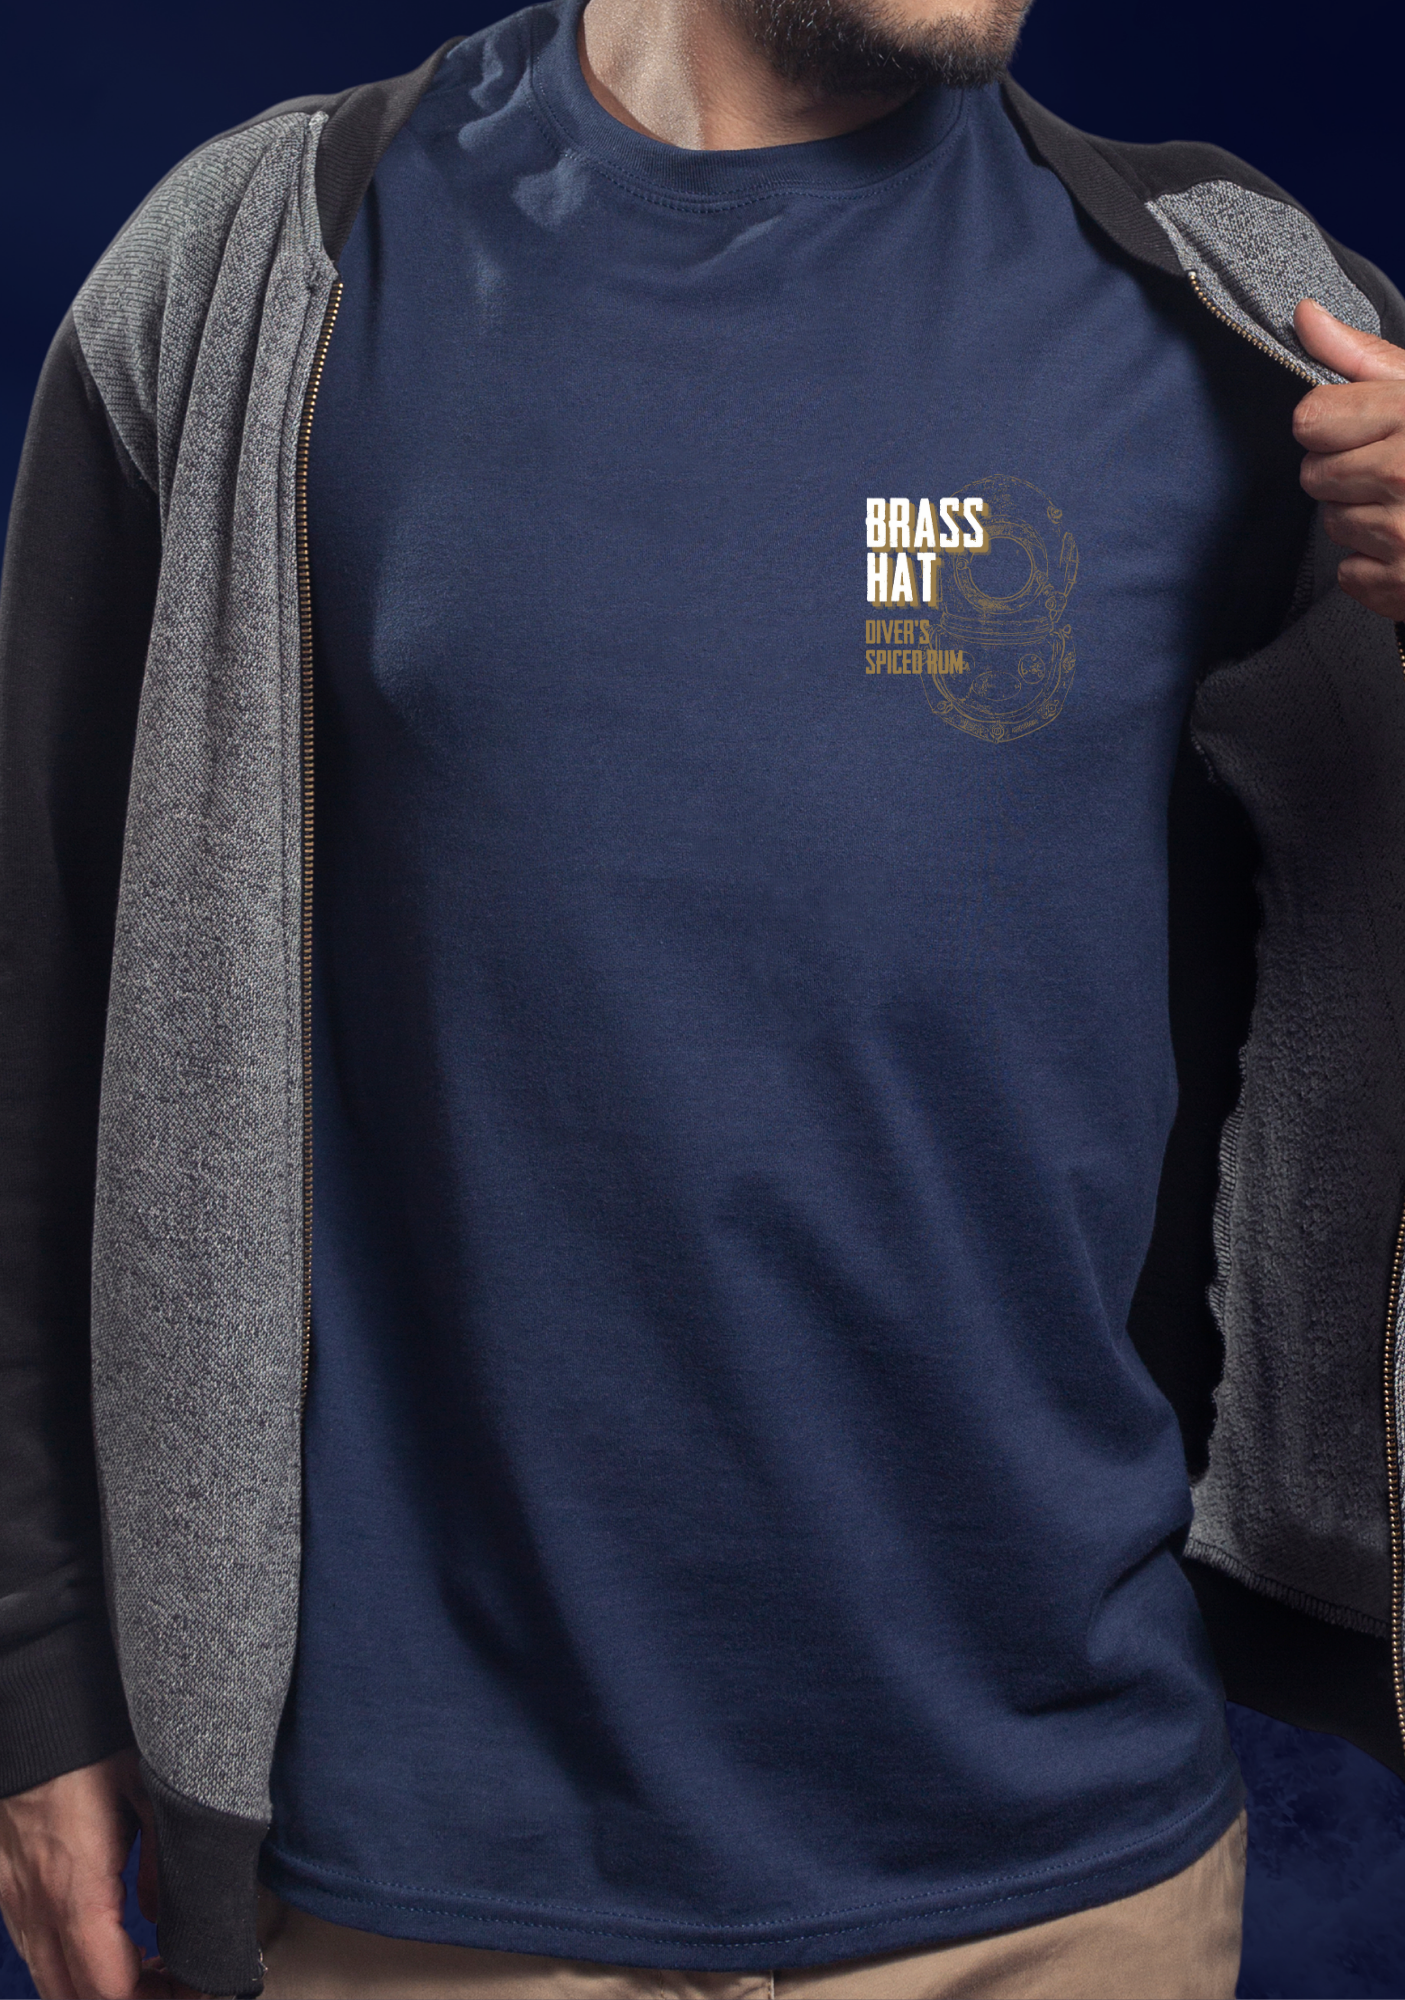 Front view of man wearing T-shirt in navy blue with deep sea diver diving helmet logo and Brass Hat Diver's Spiced Rum name